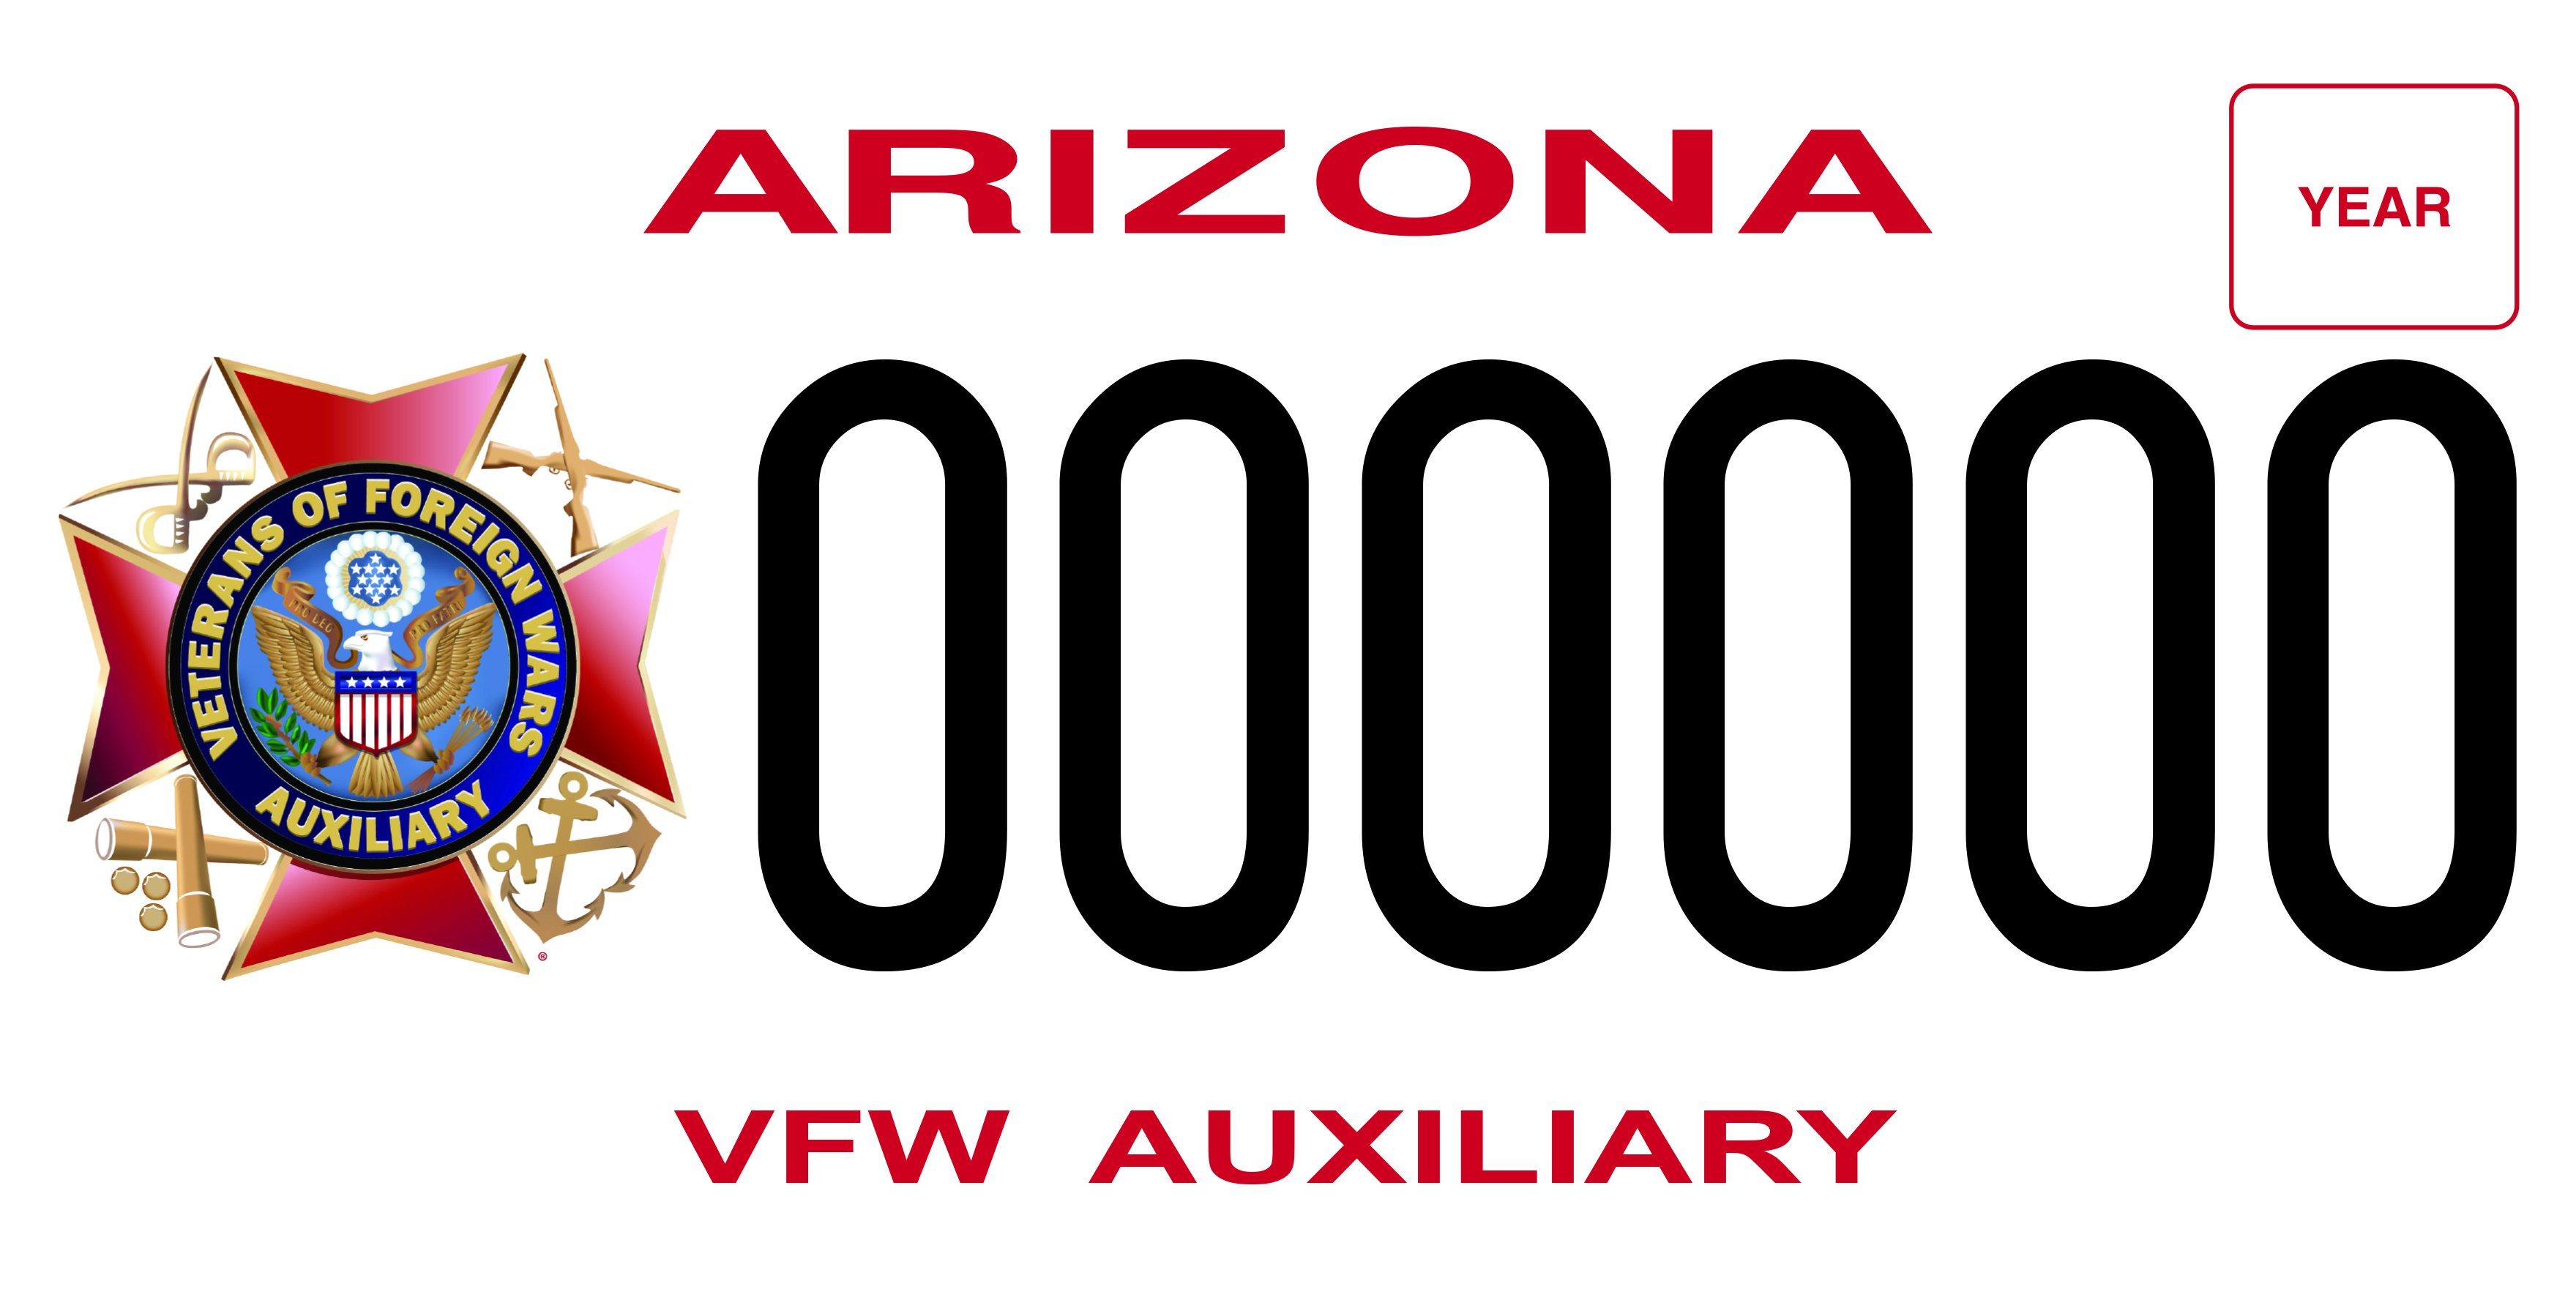 VETERANS OF FOREIGN WARS AUXILIARY ARIZONA 000000